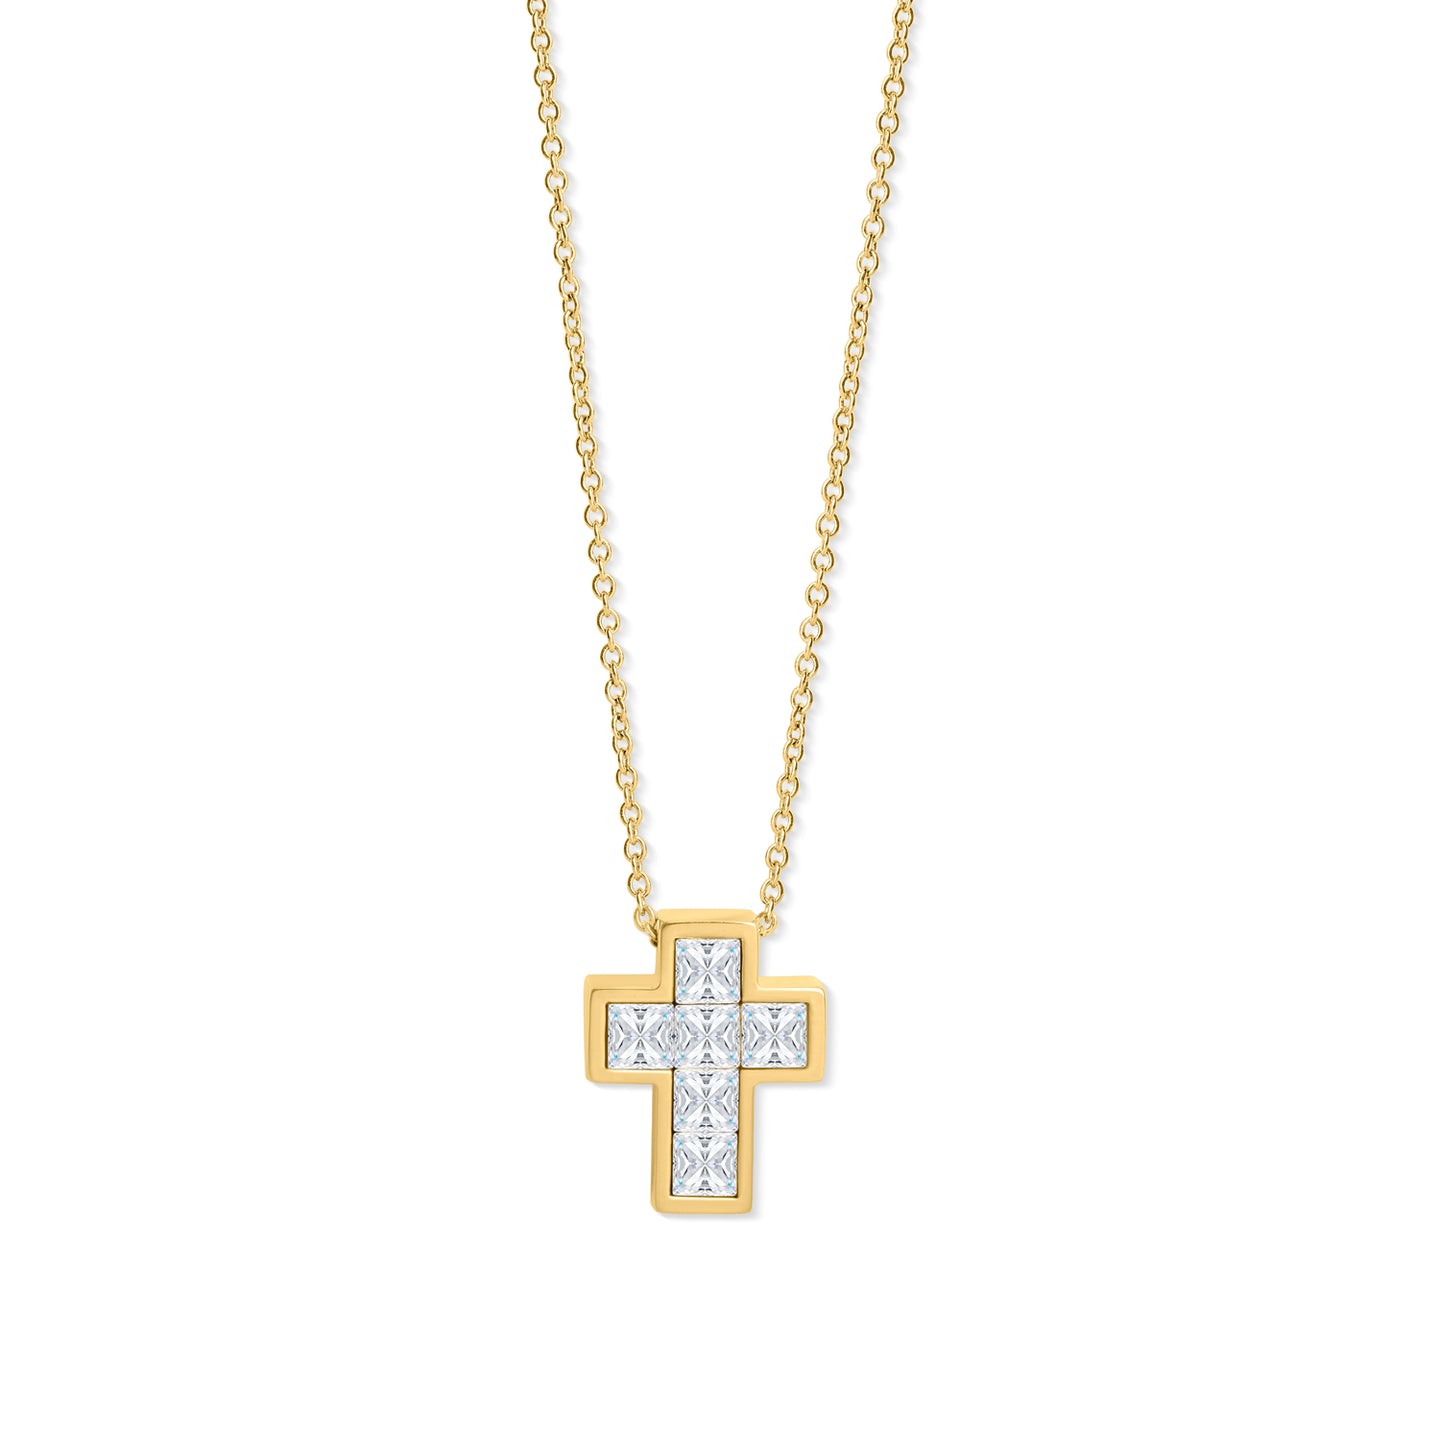 Cross Pendant set with Crystals